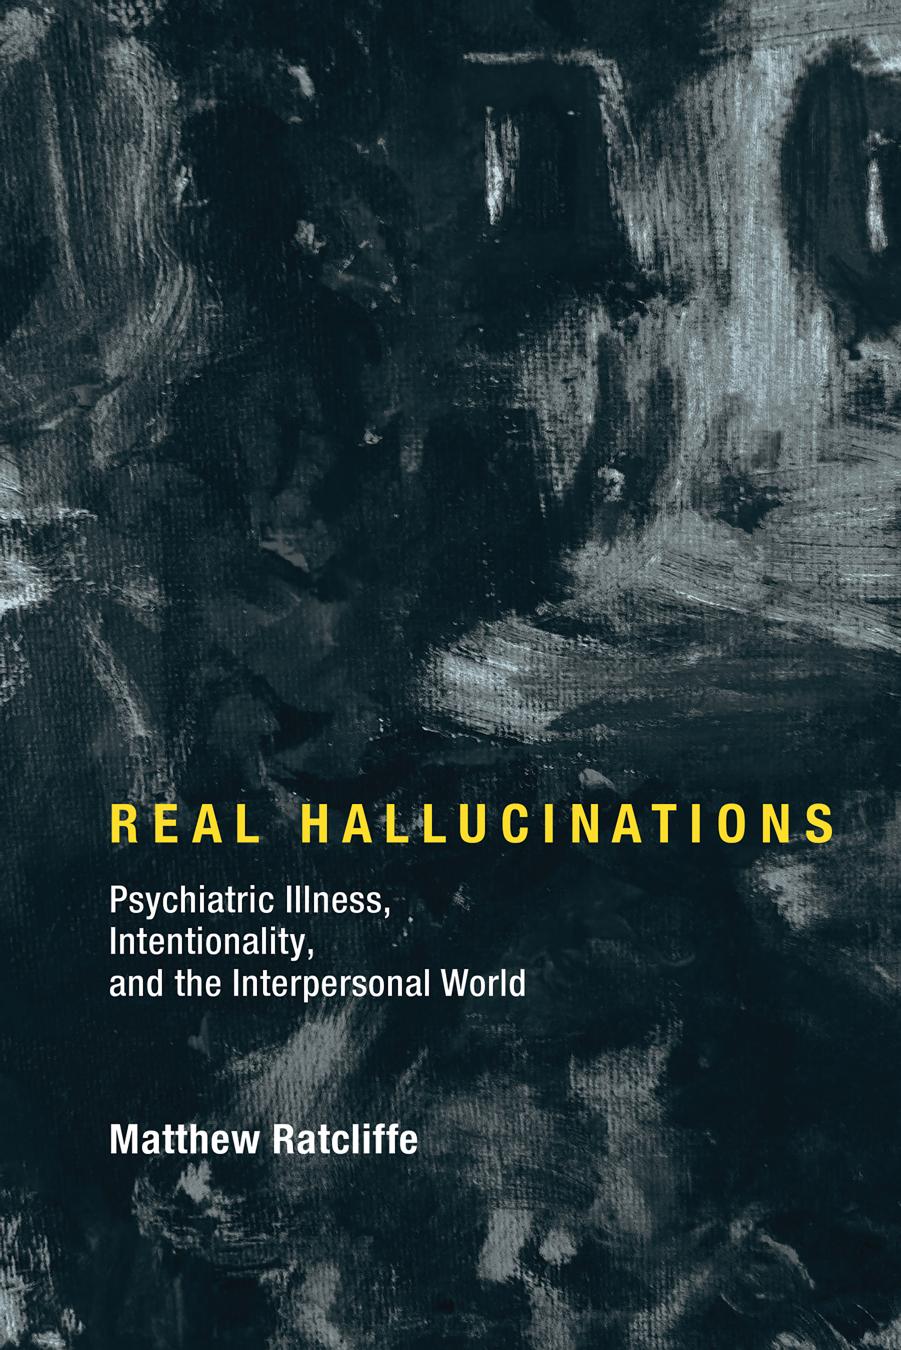 Real Hallucinations: Psychiatric Illness, Intentionality, and the Interpersonal World